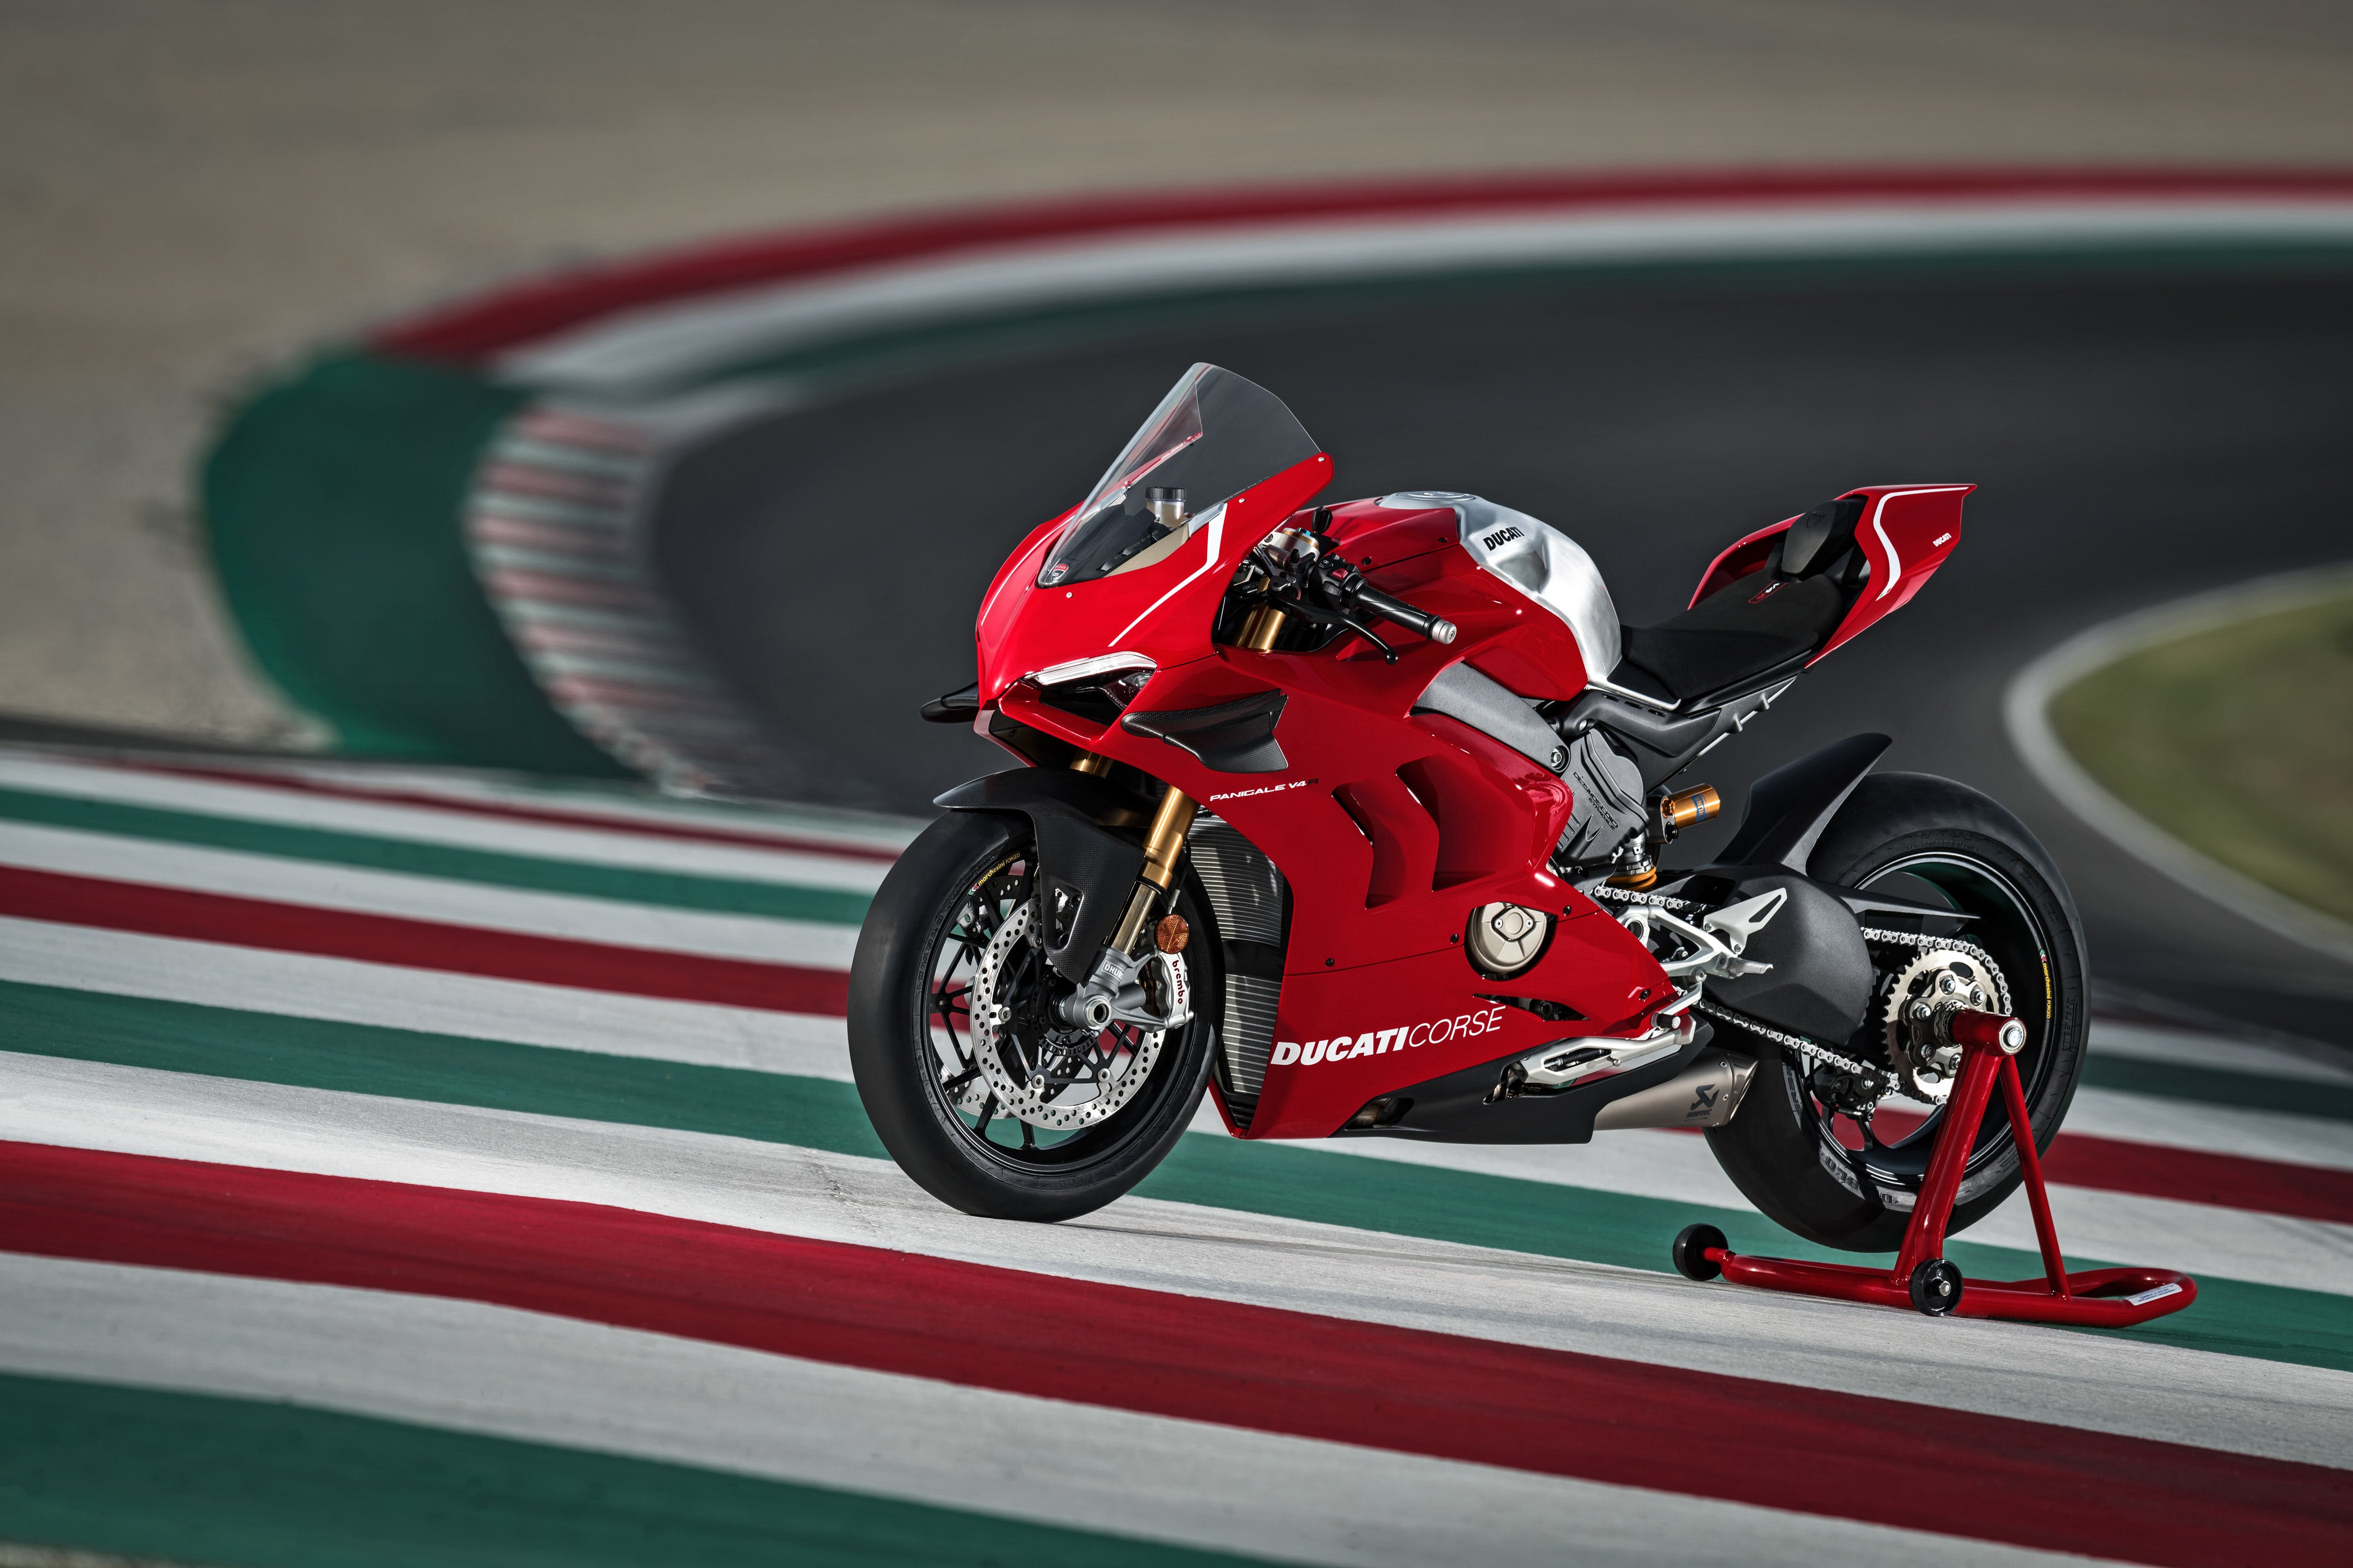 Ducati Announces Panigale V4 R Track Special Ahead of 2018 Milan